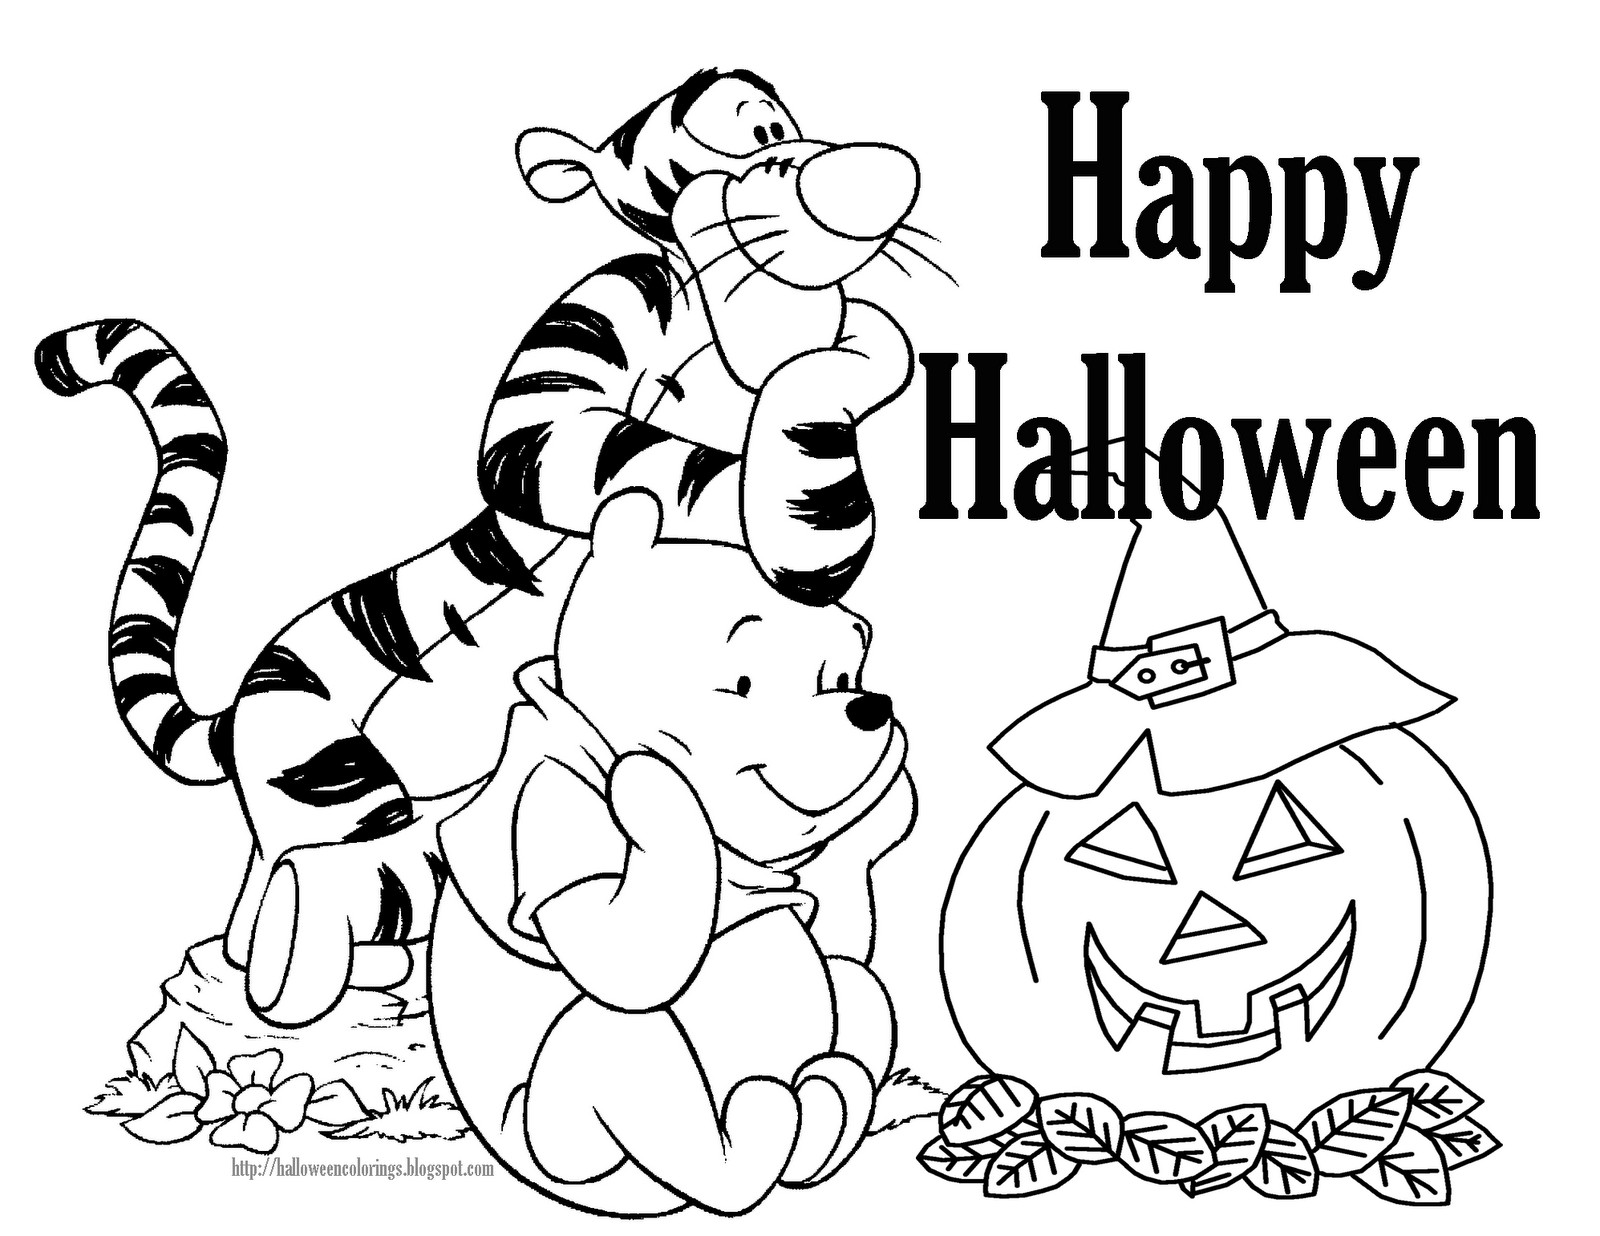 Halloween Coloring Pages Printable Free
 Halloween Coloring Pages – Free Printable Minnesota Miranda